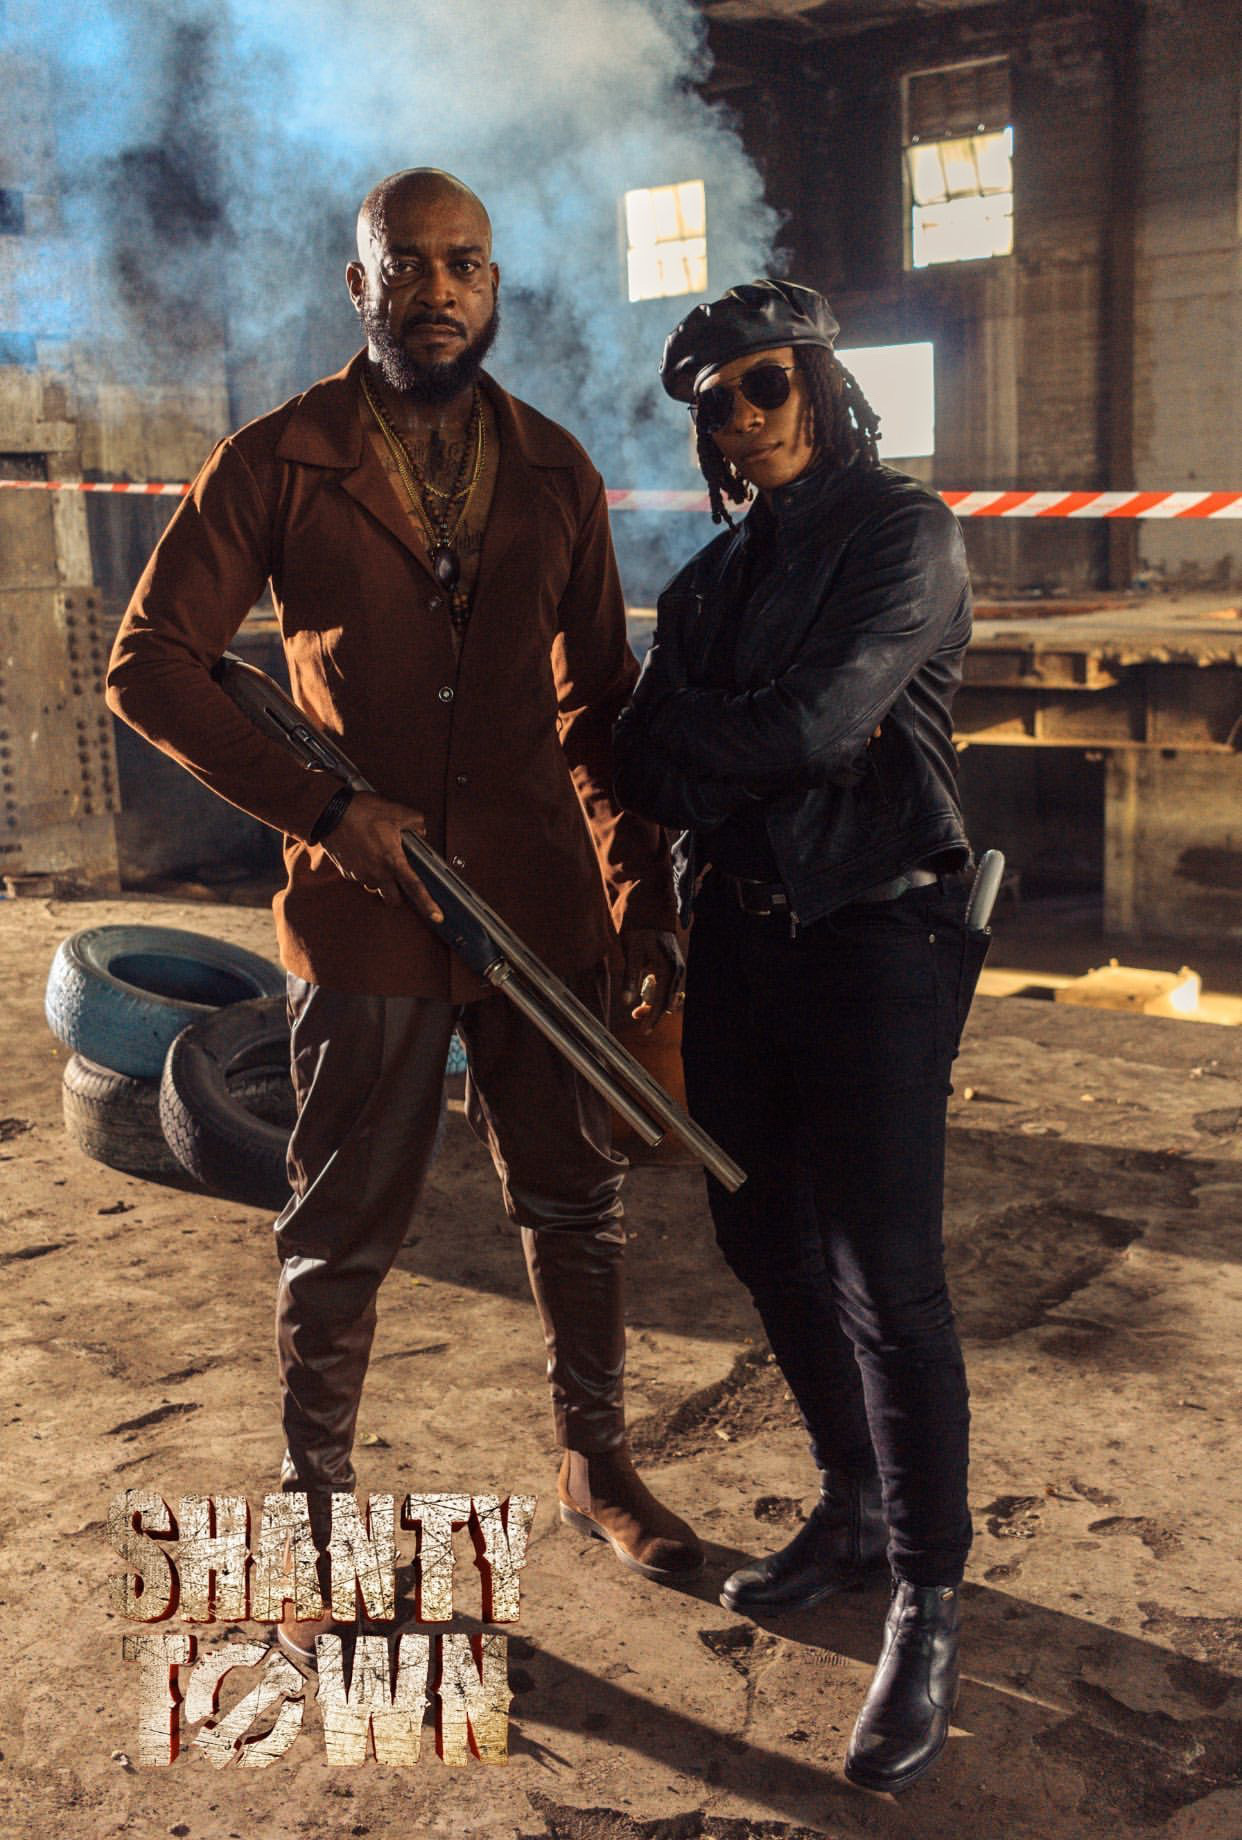 C1A83376 008A 4373 ACAB C736E62A1647 - “Shanty Town” Acquired By Netflix As 6 Part Original Series, To Globally Launch On January 20th 2023